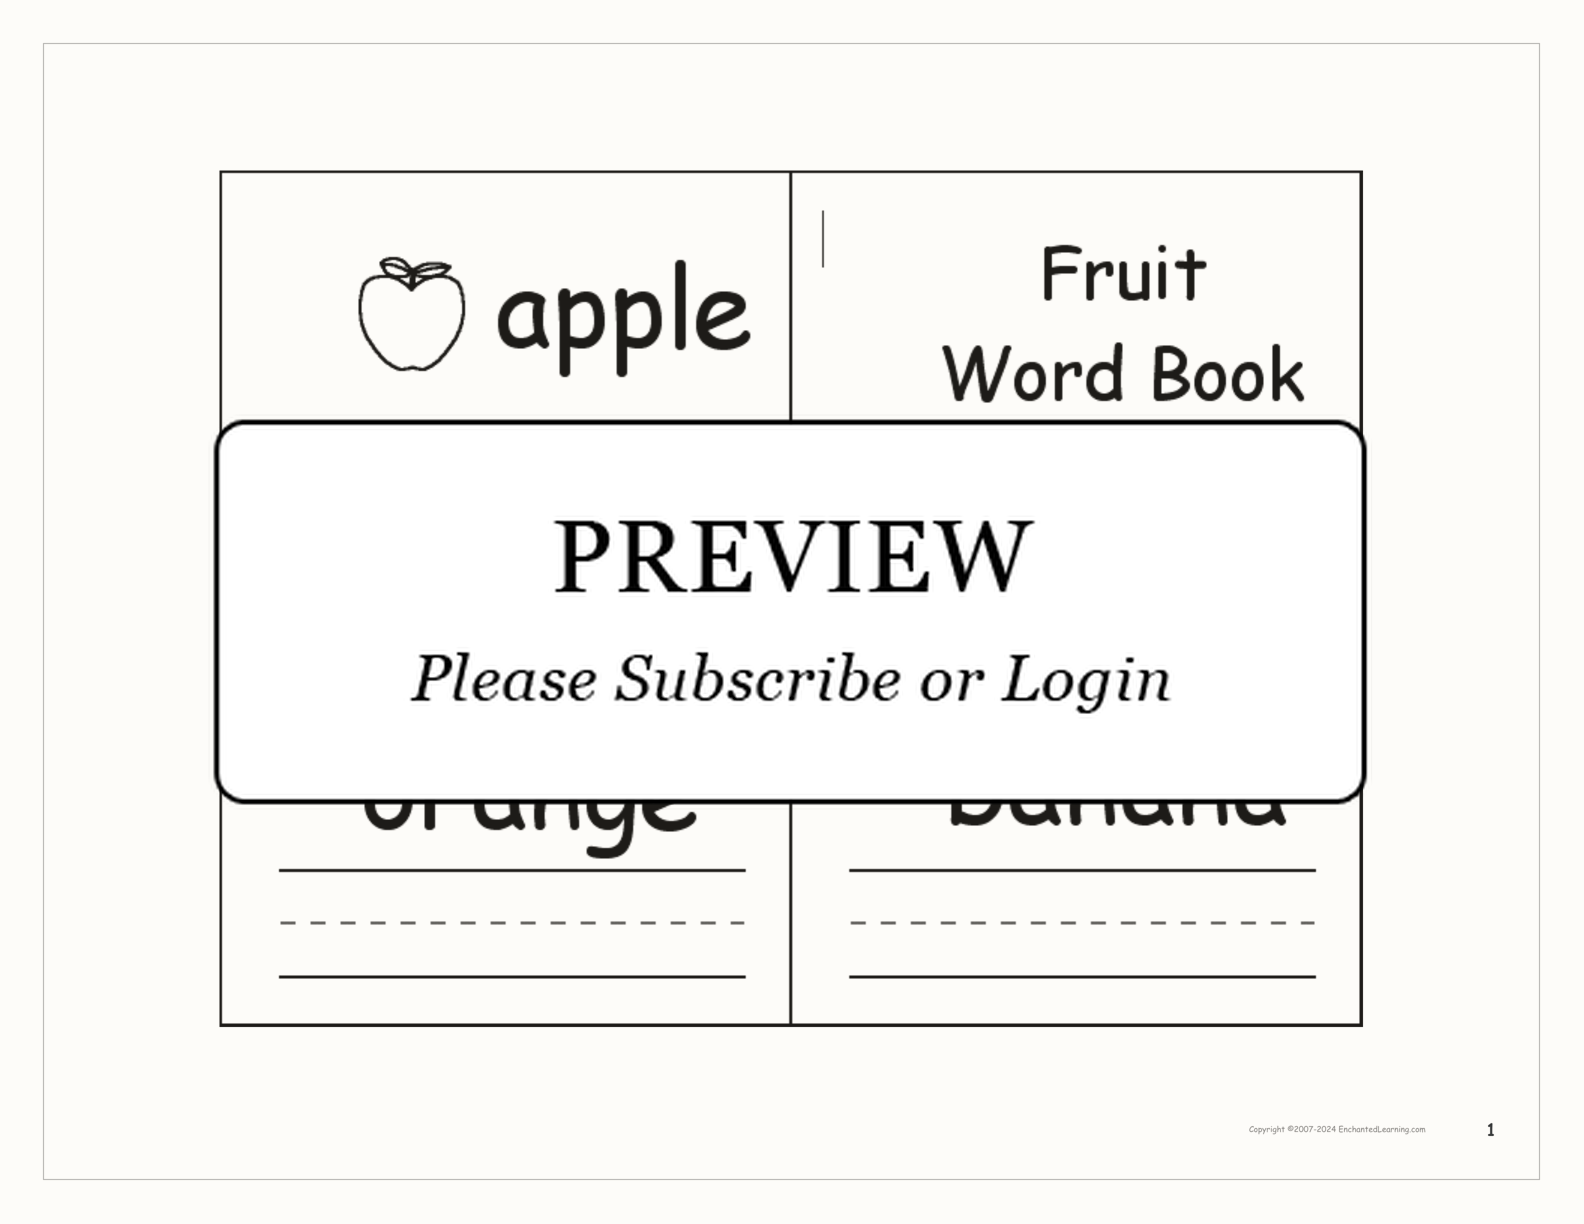 Fruit Word Book interactive printout page 1